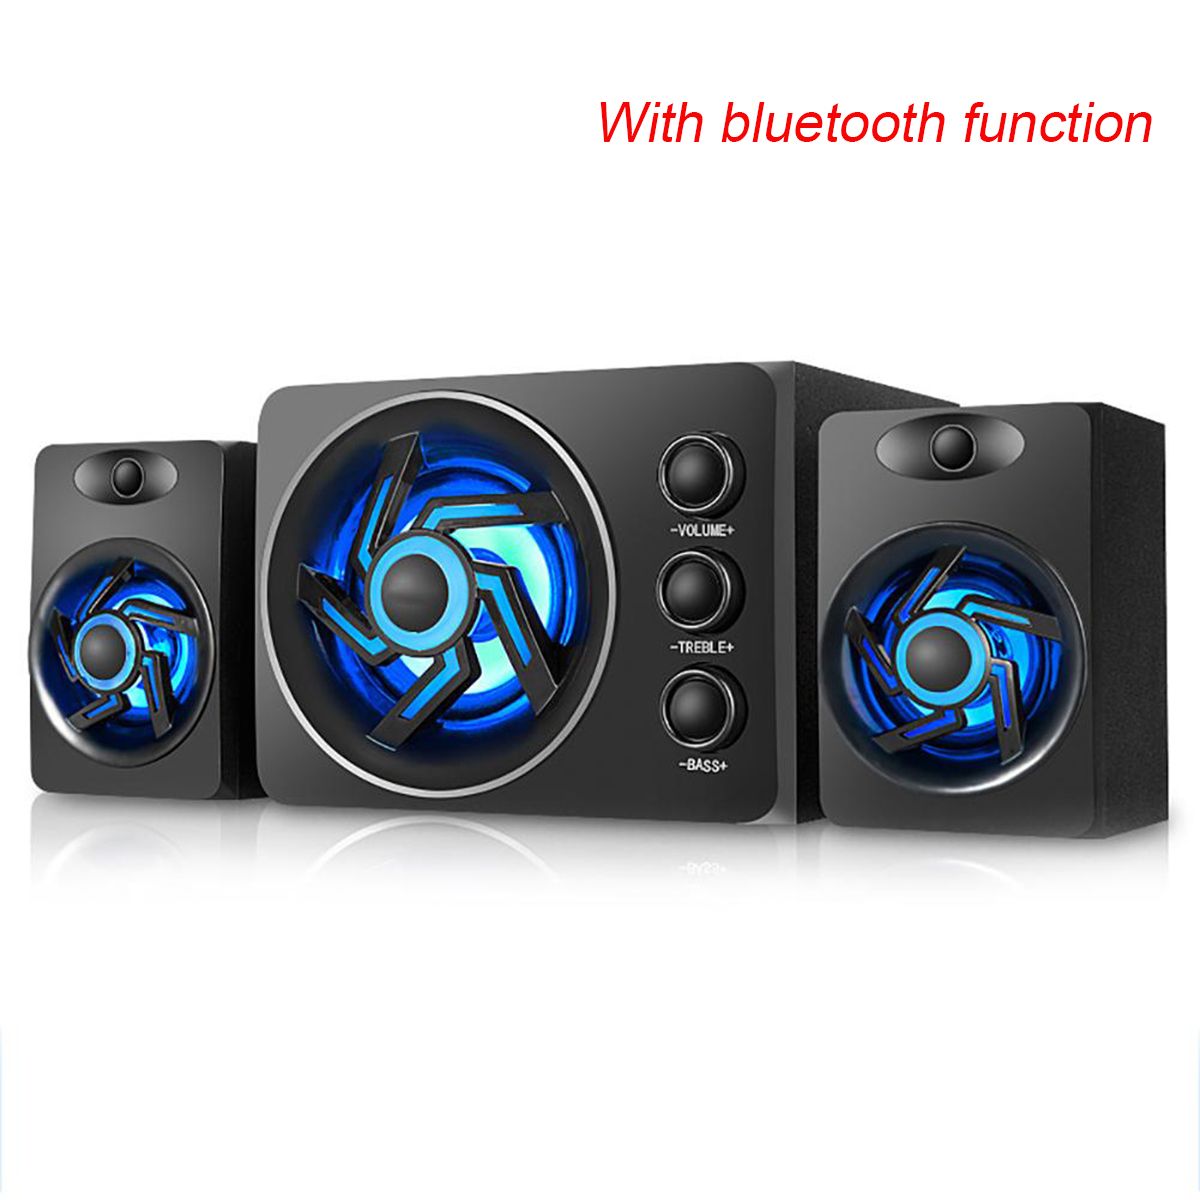 21-Computer-bluetooth-Speaker-Wooden-Bass-TF-Card-U-Disk-LED-Light-Wired-Speakers-1559048